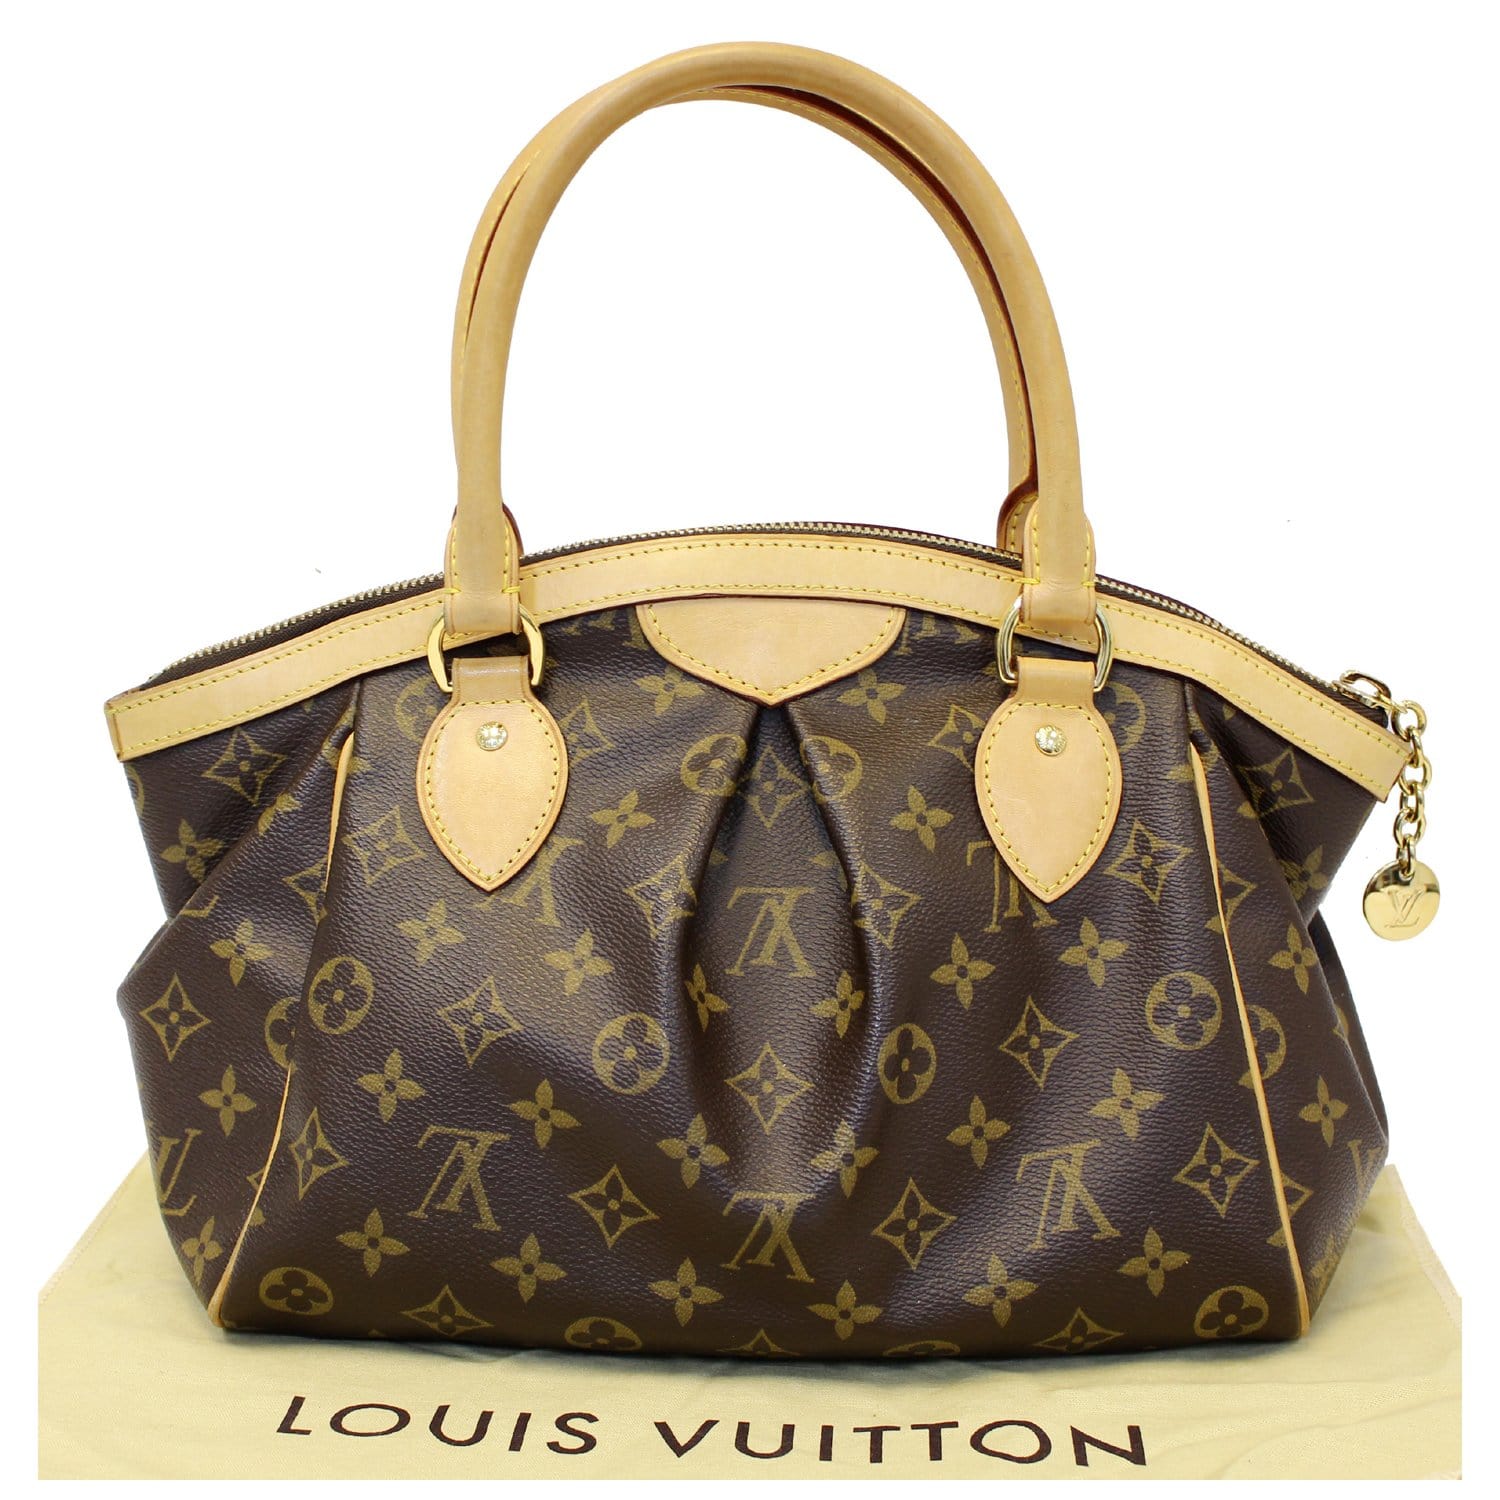 LOUIS VUITTON ASNIÈRES ATELIER AND GALLERY TO REOPEN THIS MAY  Louis  vuitton luggage, Louis vuitton official website, Louis vuitton